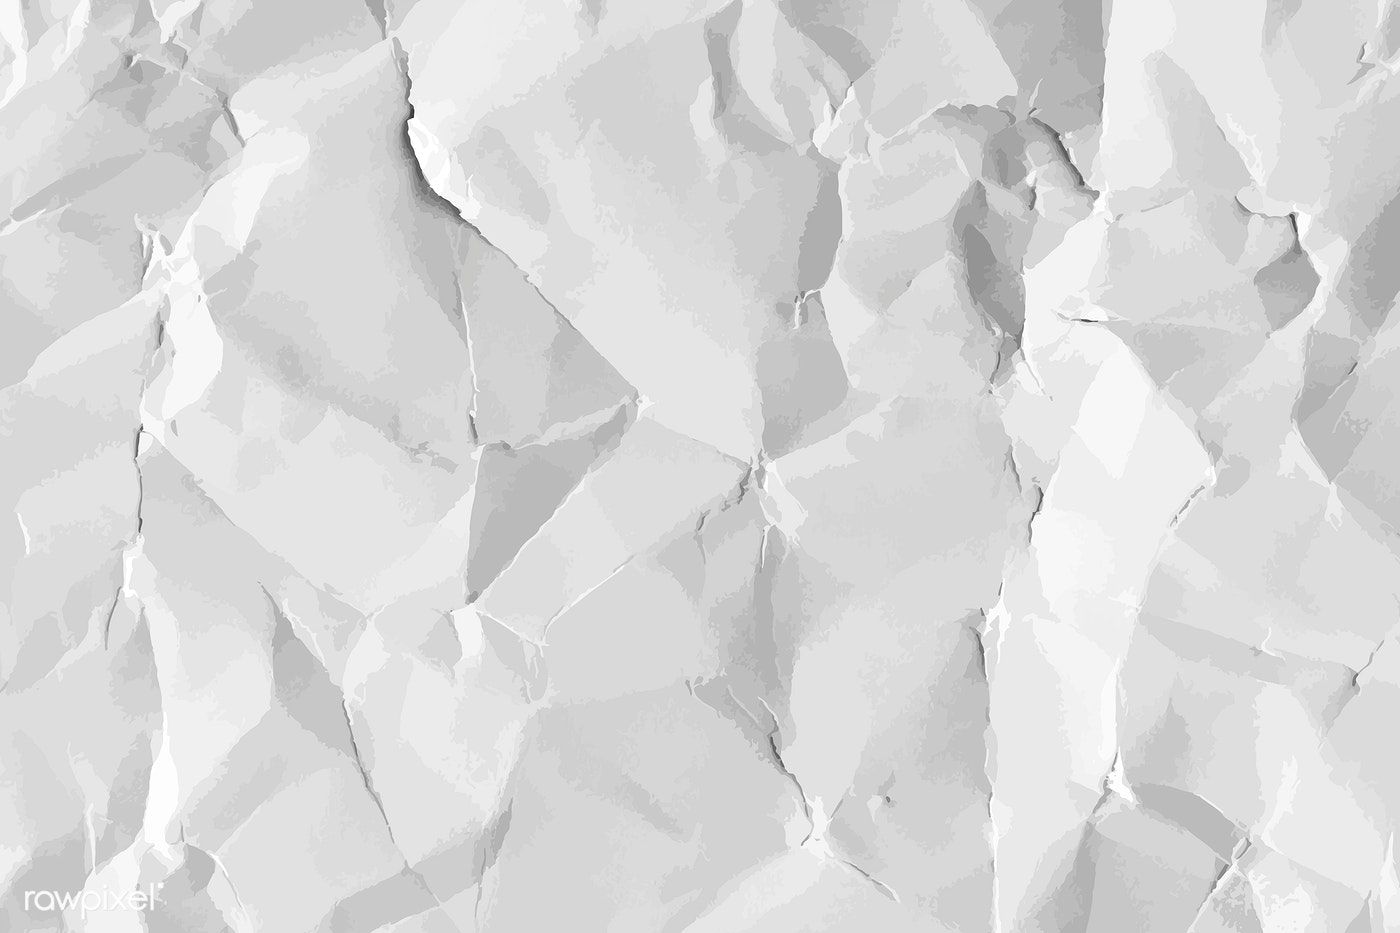 White crumpled paper textured background vector. free image by rawpixel.com / Niwat. Crumpled paper textures, Paper texture, Crumpled paper texture background